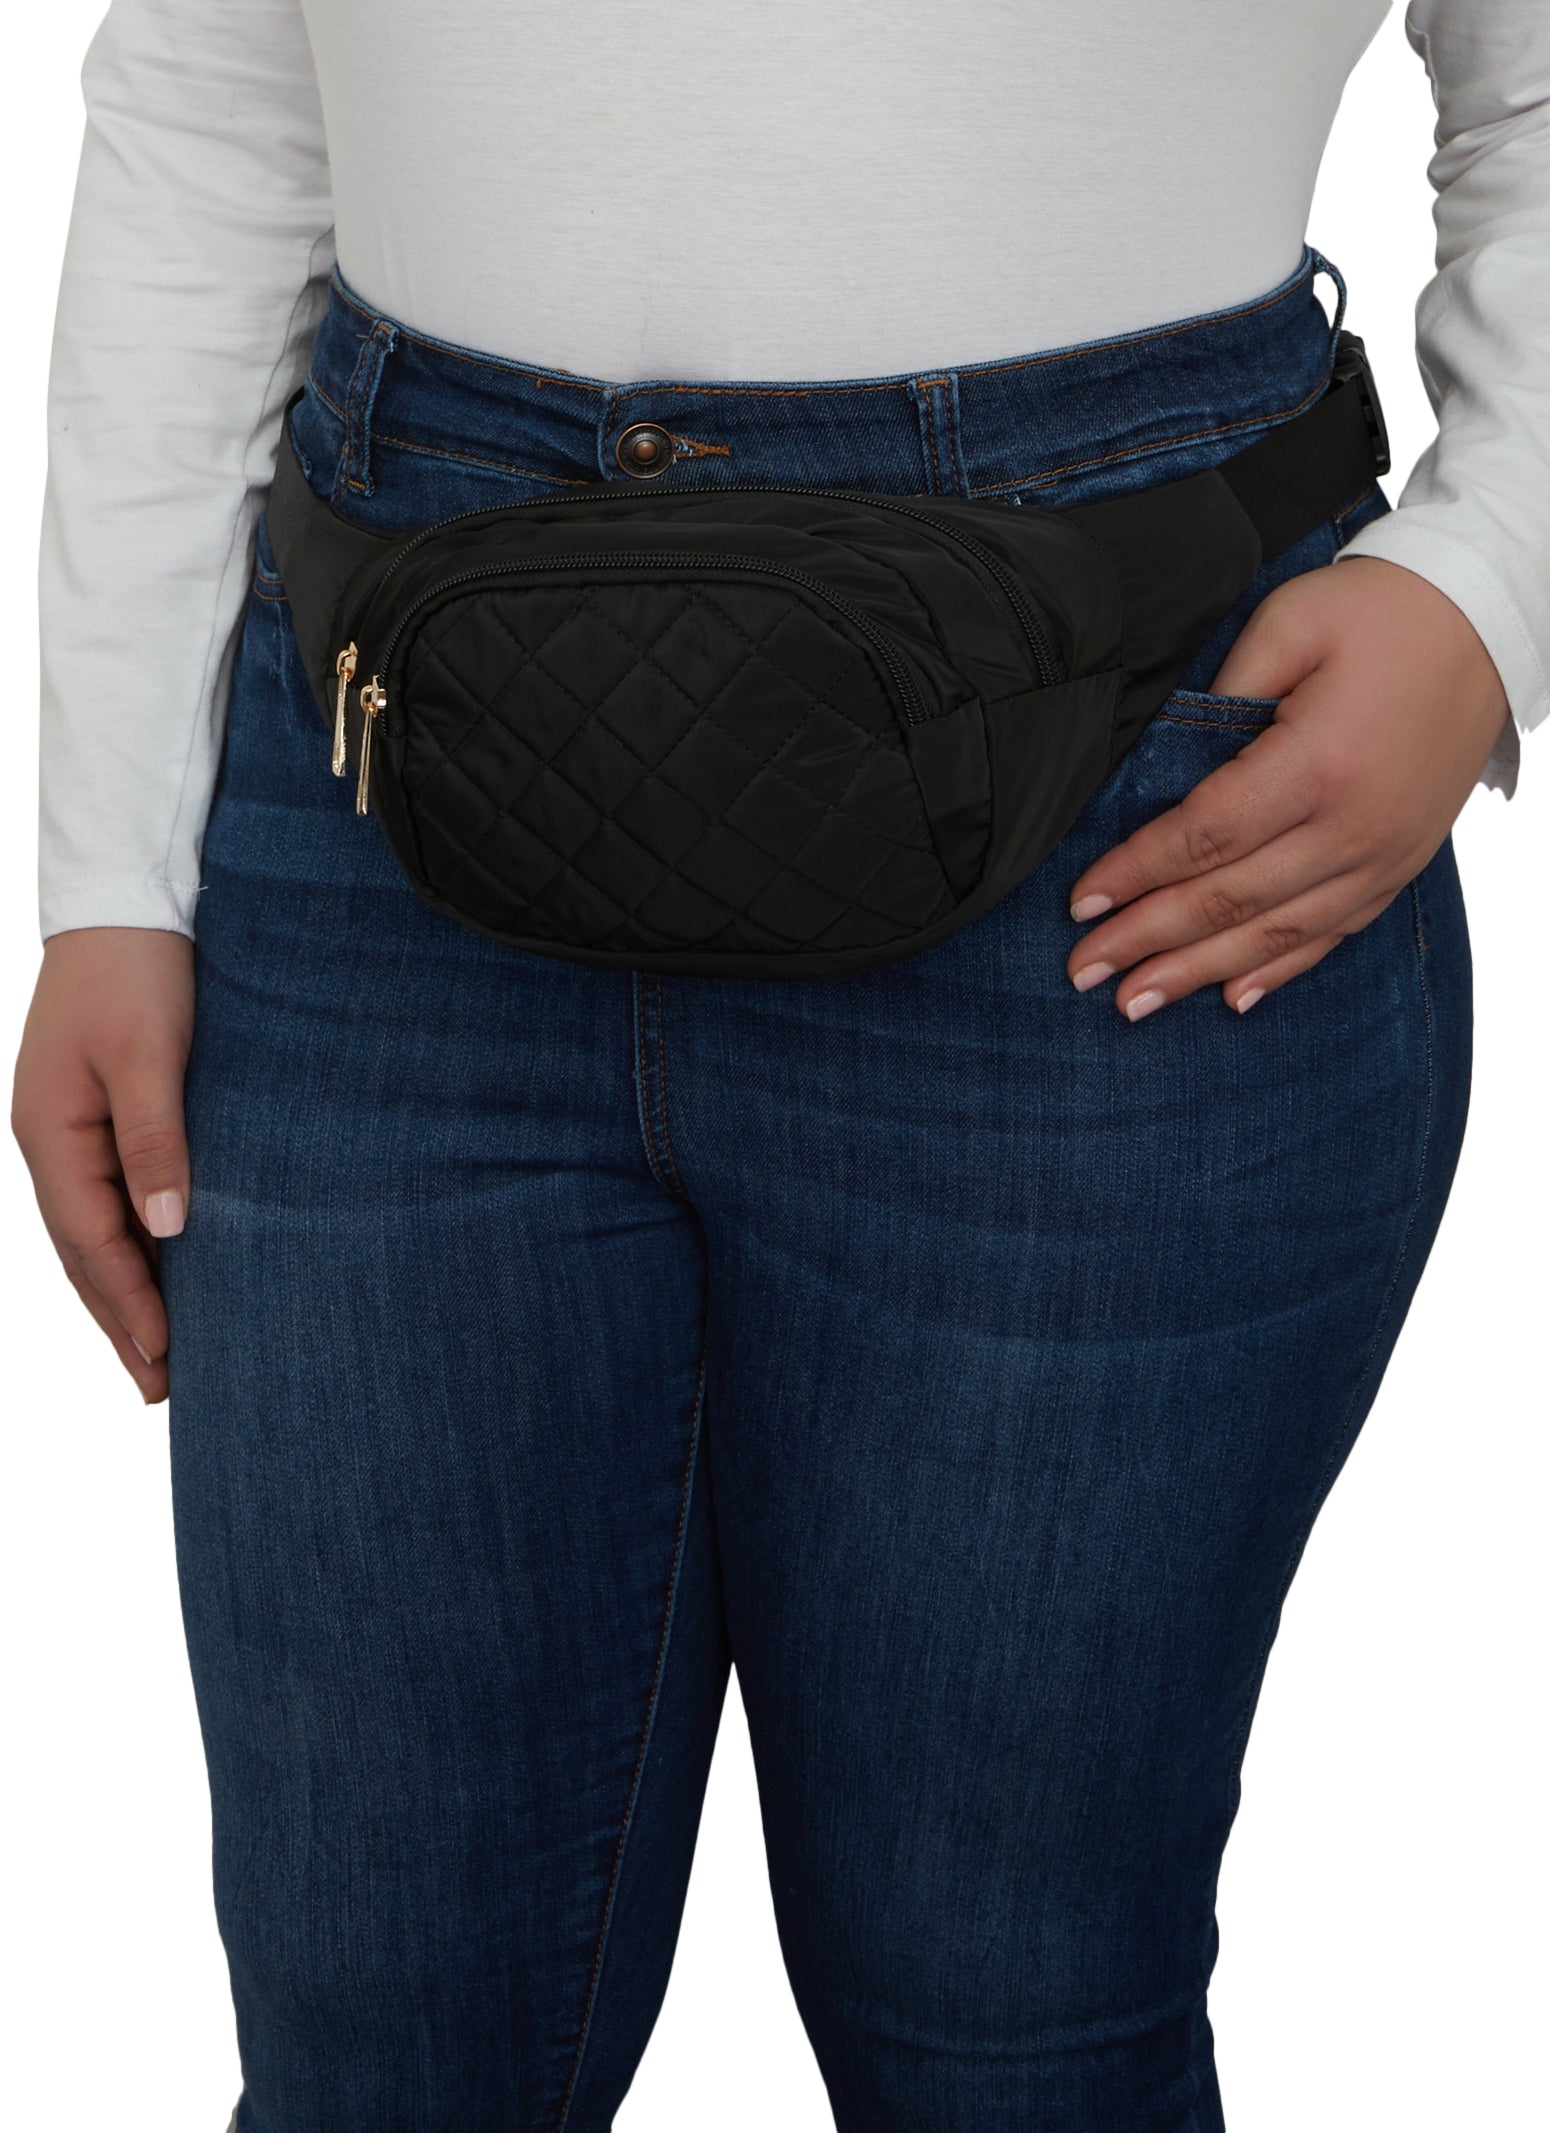 Quilted Zip Nylon Fanny Pack